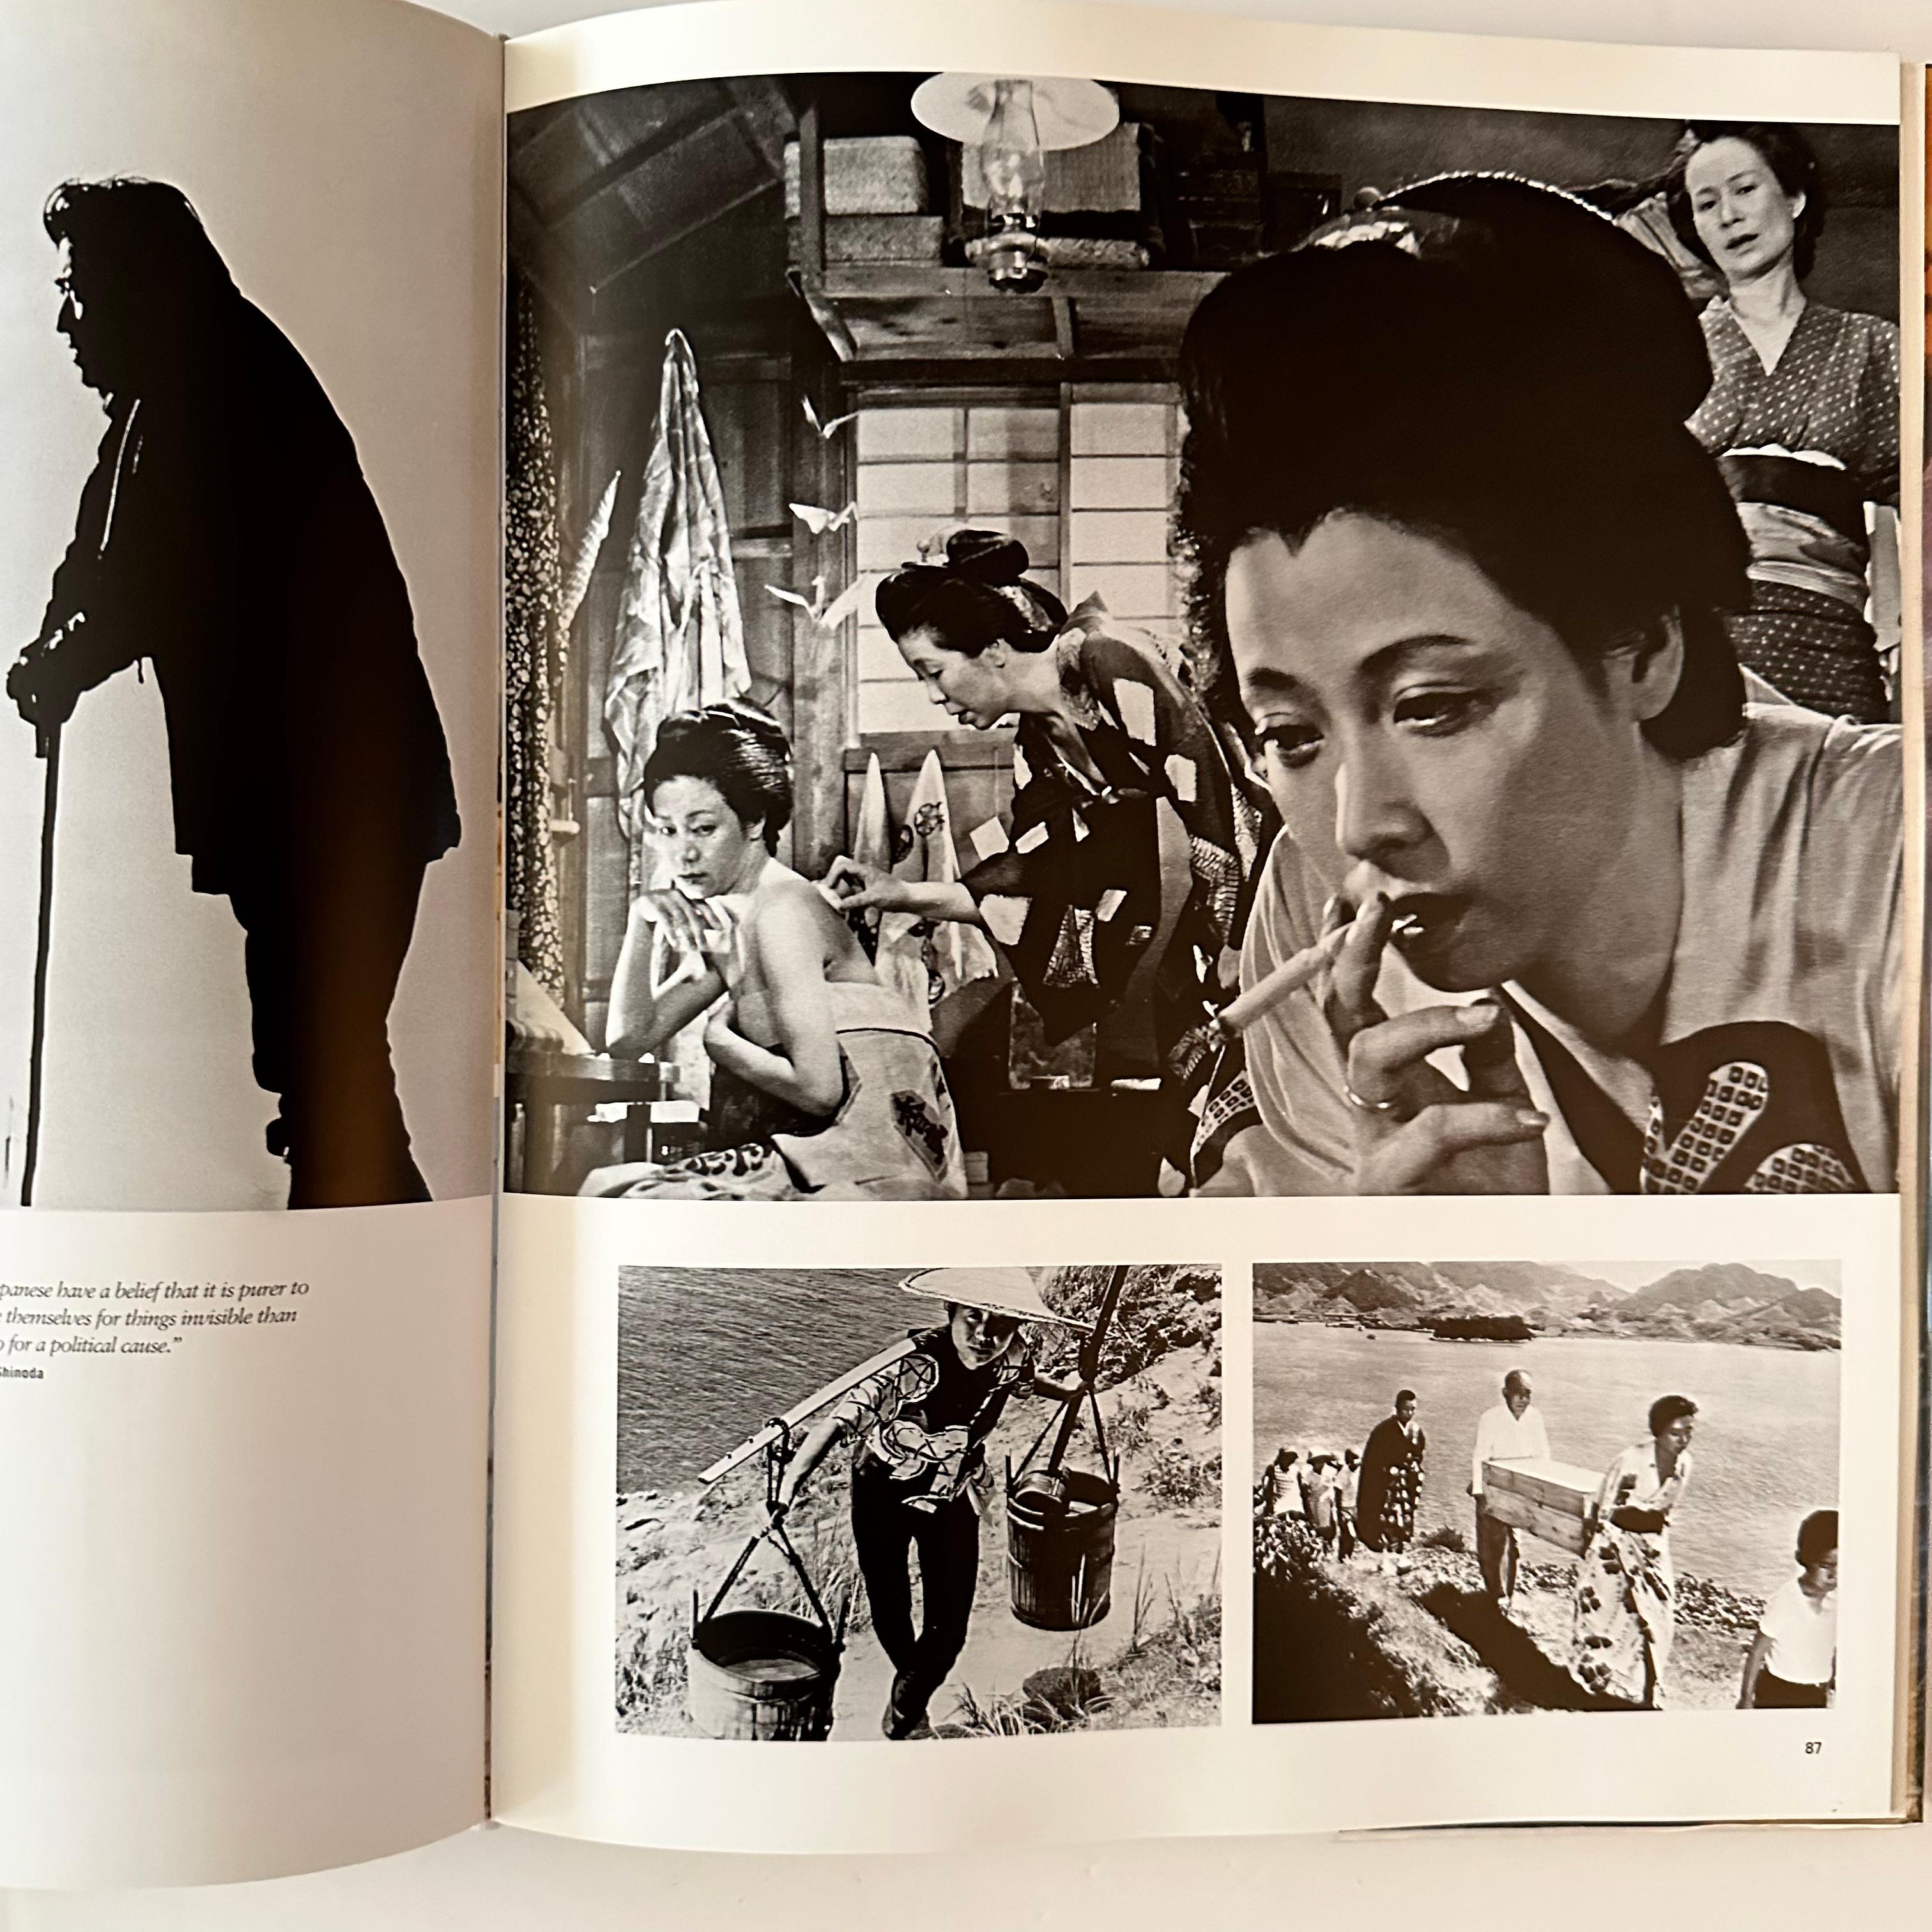 An amazing book exploring the work of the greatest Japanese filmmakers. Until recently, the Western world has viewed Japanese cinema through a very narrow prism. For years, Westerners interested in Japanese film had to content themselves with the